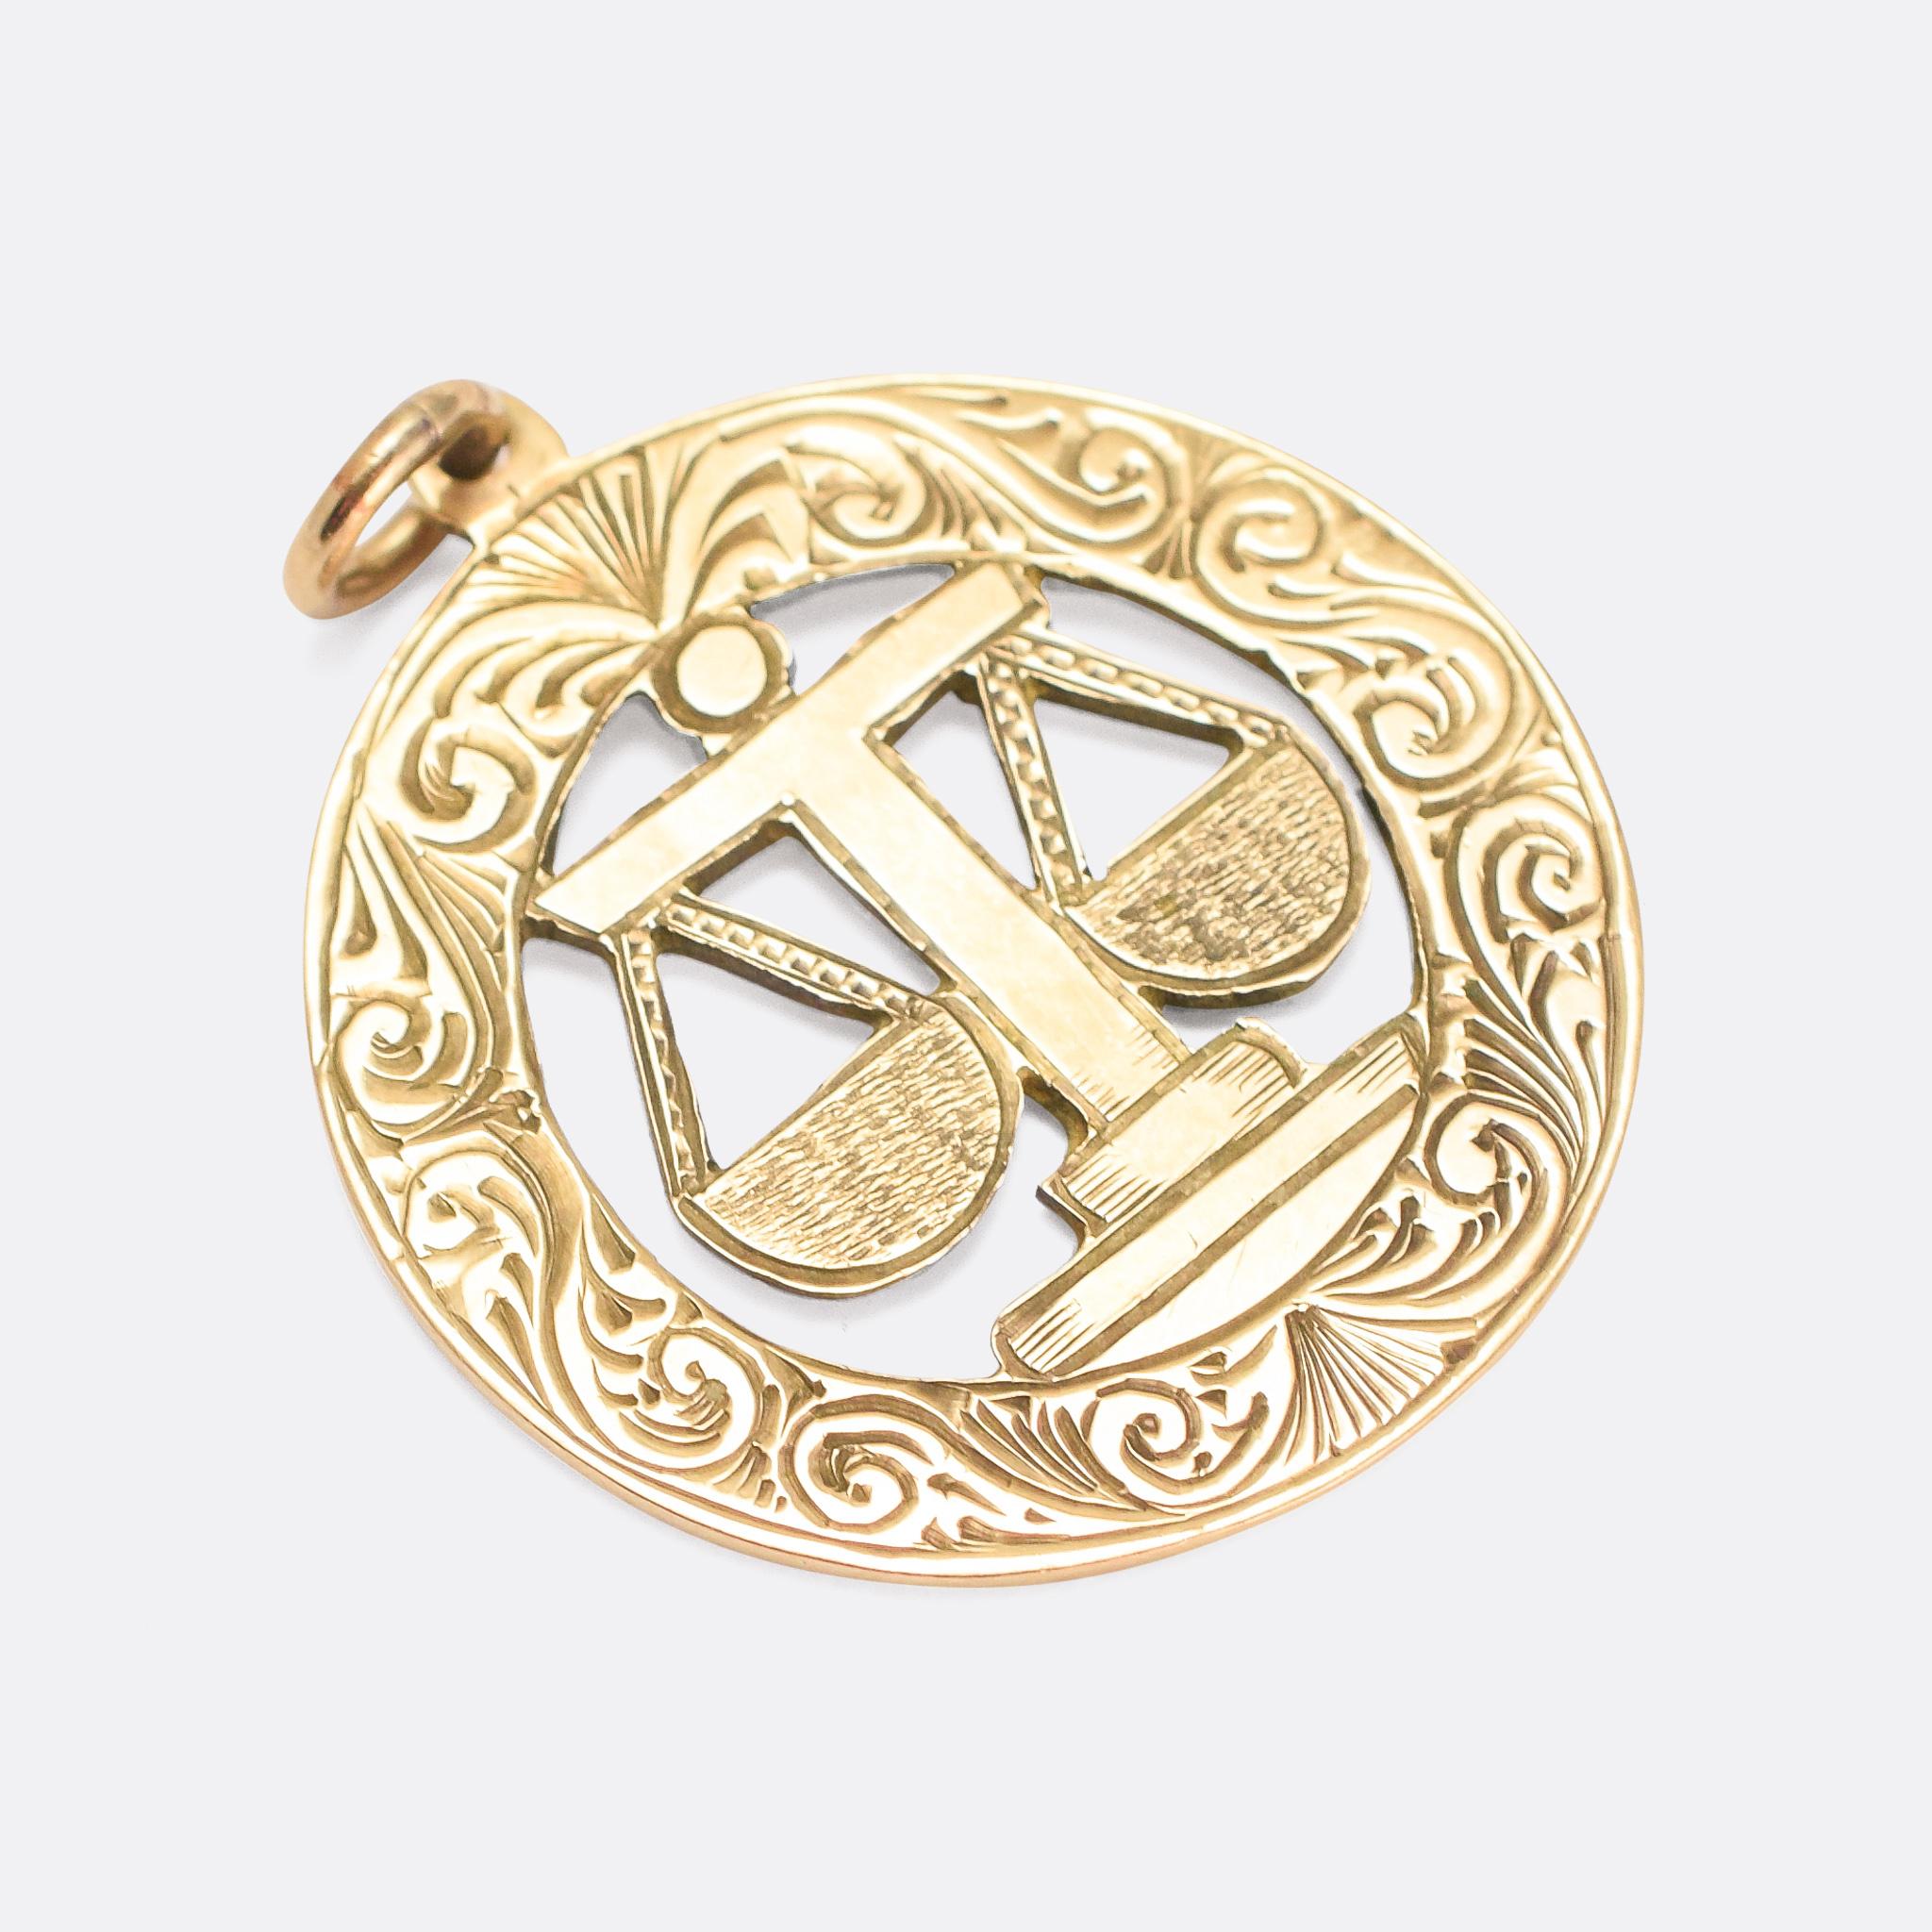 A substantial vintage Zodiac medallion dating from the 1970s. It's modelled in 9k gold, and depicts the scales of Libra - beautifully openworked and adorned with hand-chased scrolled detailing. With clear Edinburgh hallmarks dating from the year